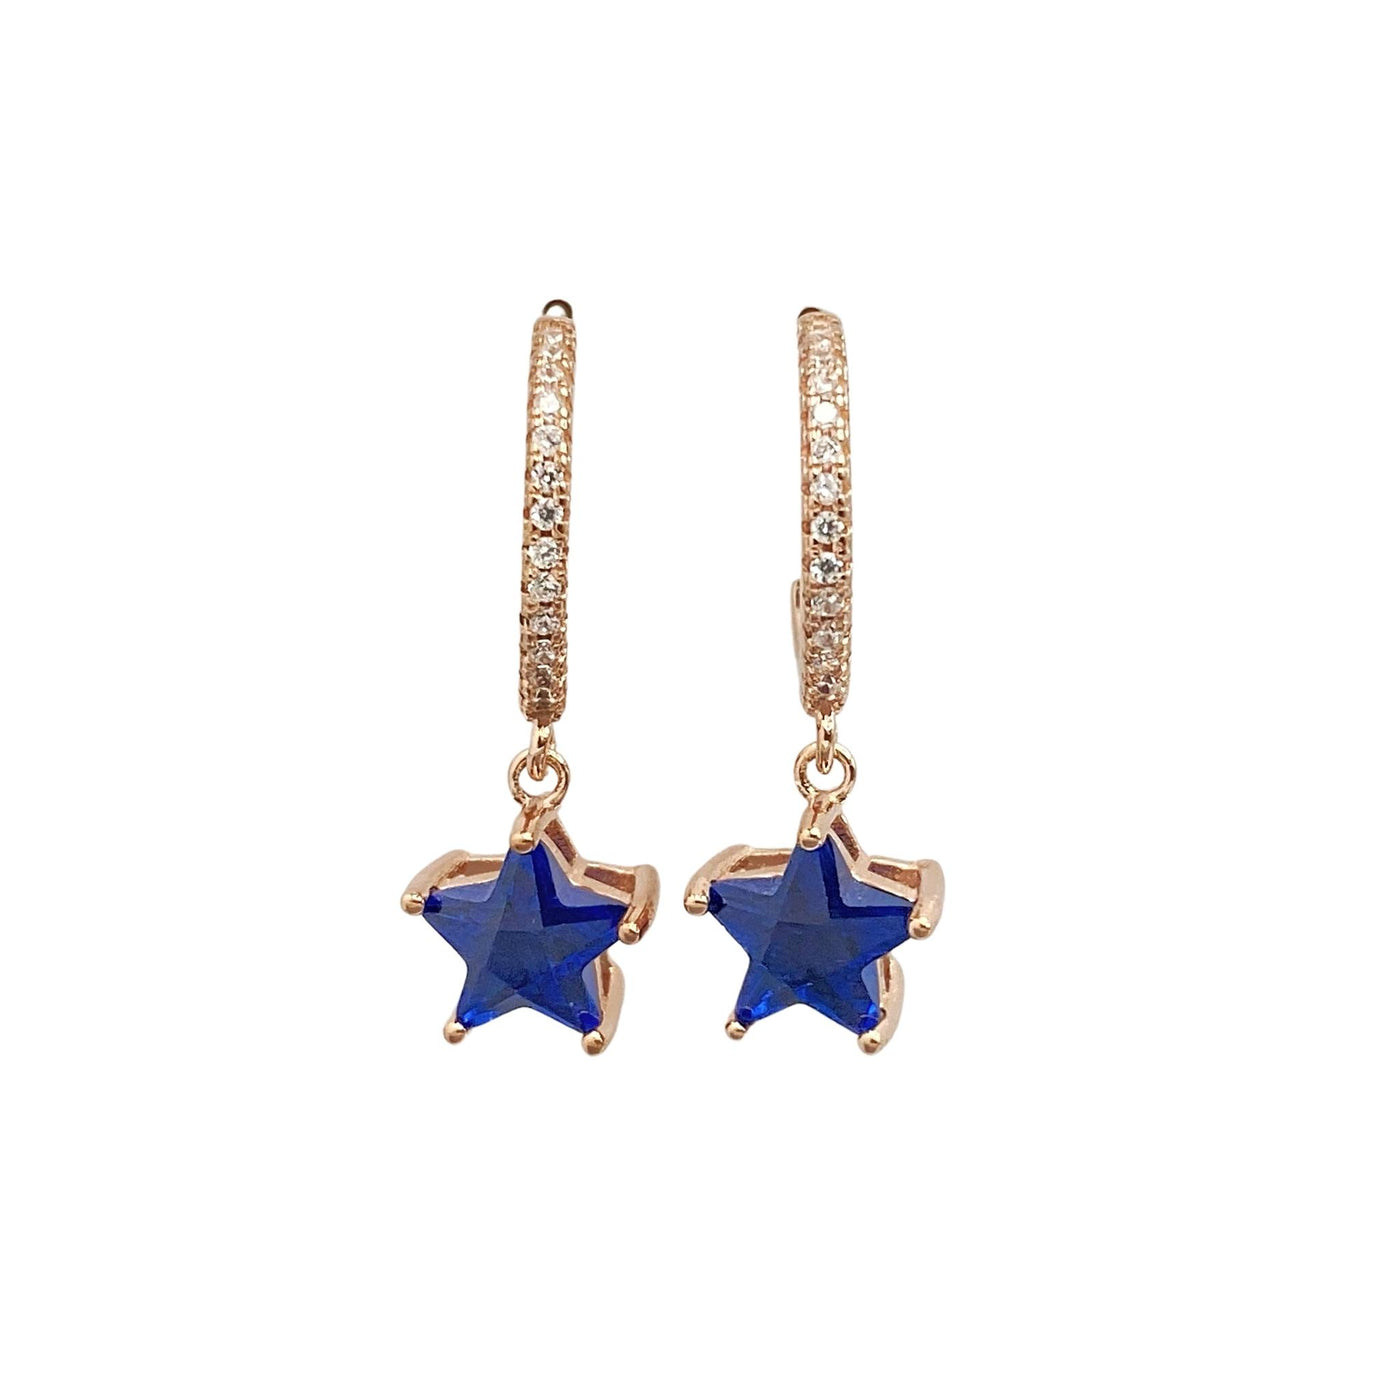 Silver earrings with star charm - 7 mm - rose